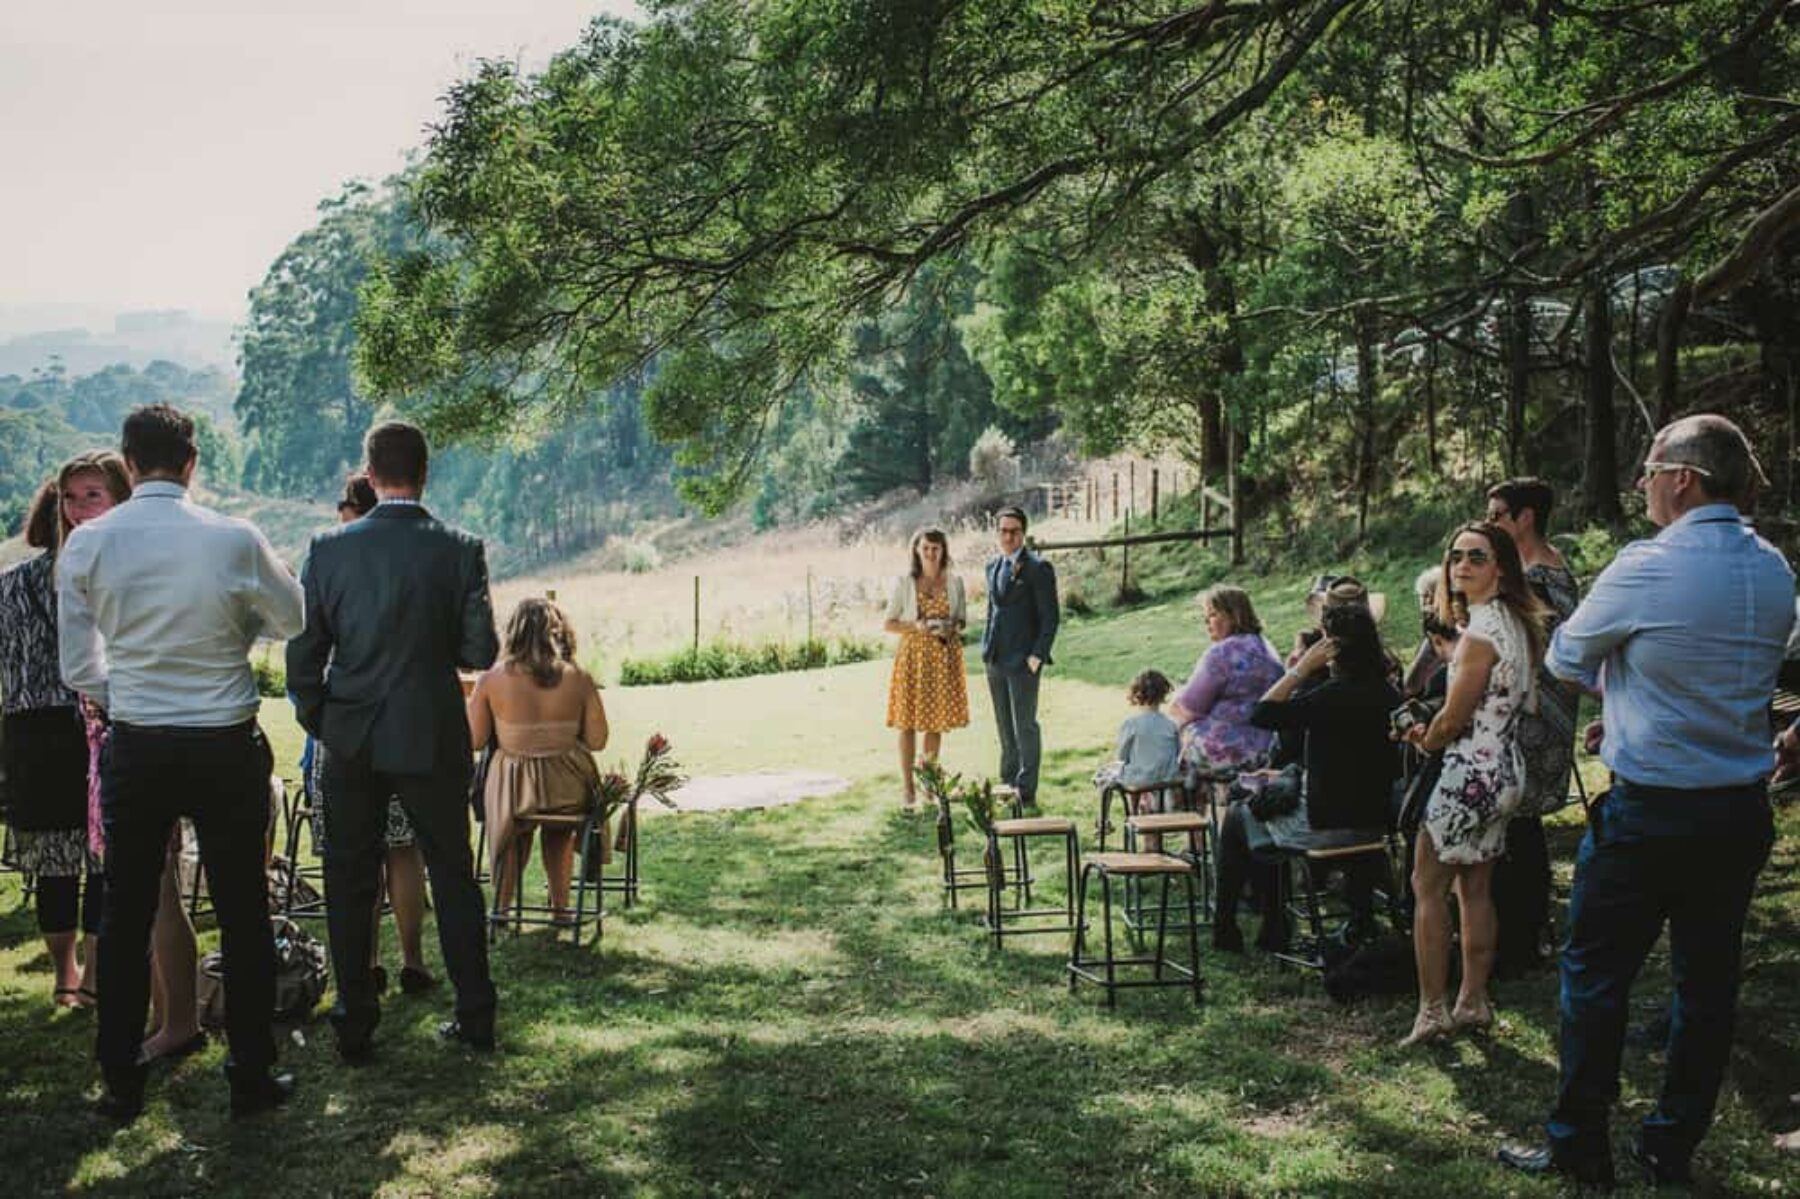 DIY festival wedding / Photography by She Takes Pictures he Makes Films